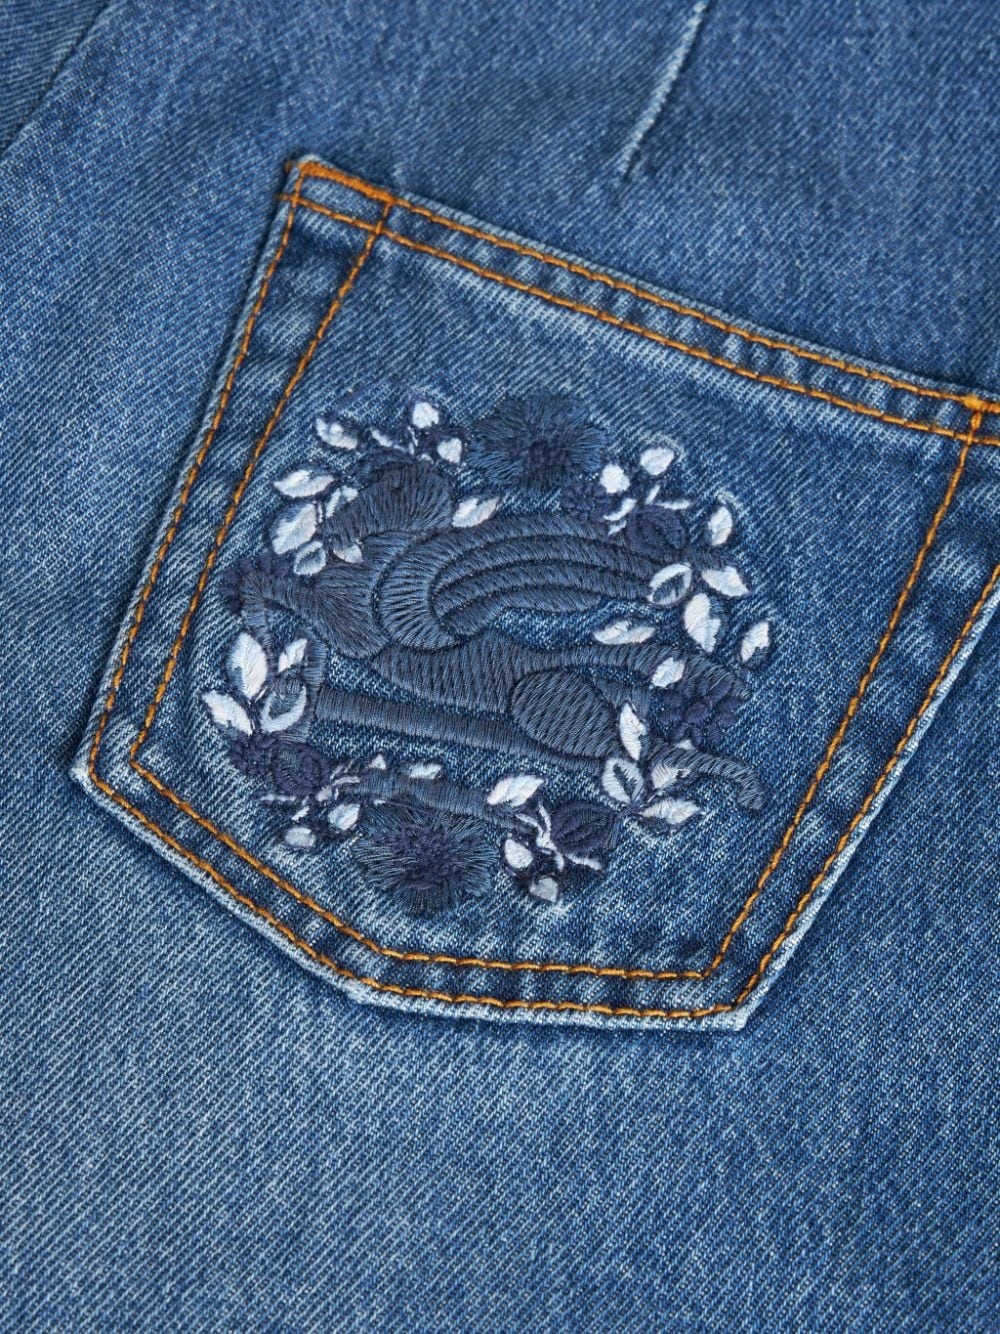 floral-embroidered belted jeans - 6